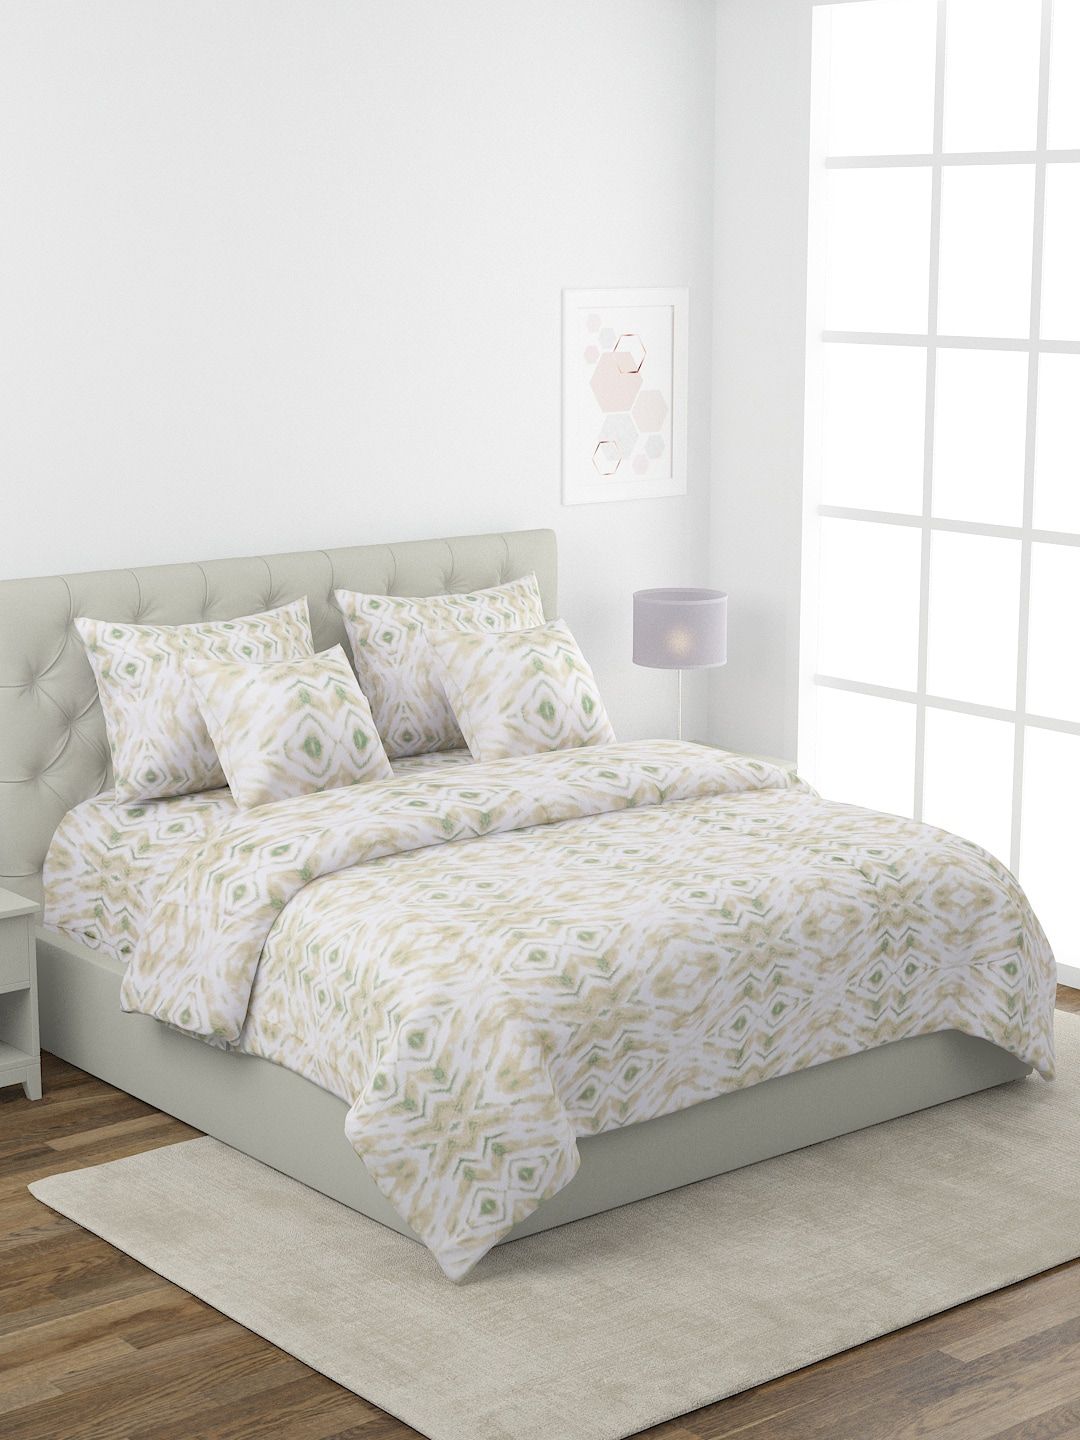 ROMEE Brown & White Printed  Pure Cotton Superfine Double King Bedding Set Price in India